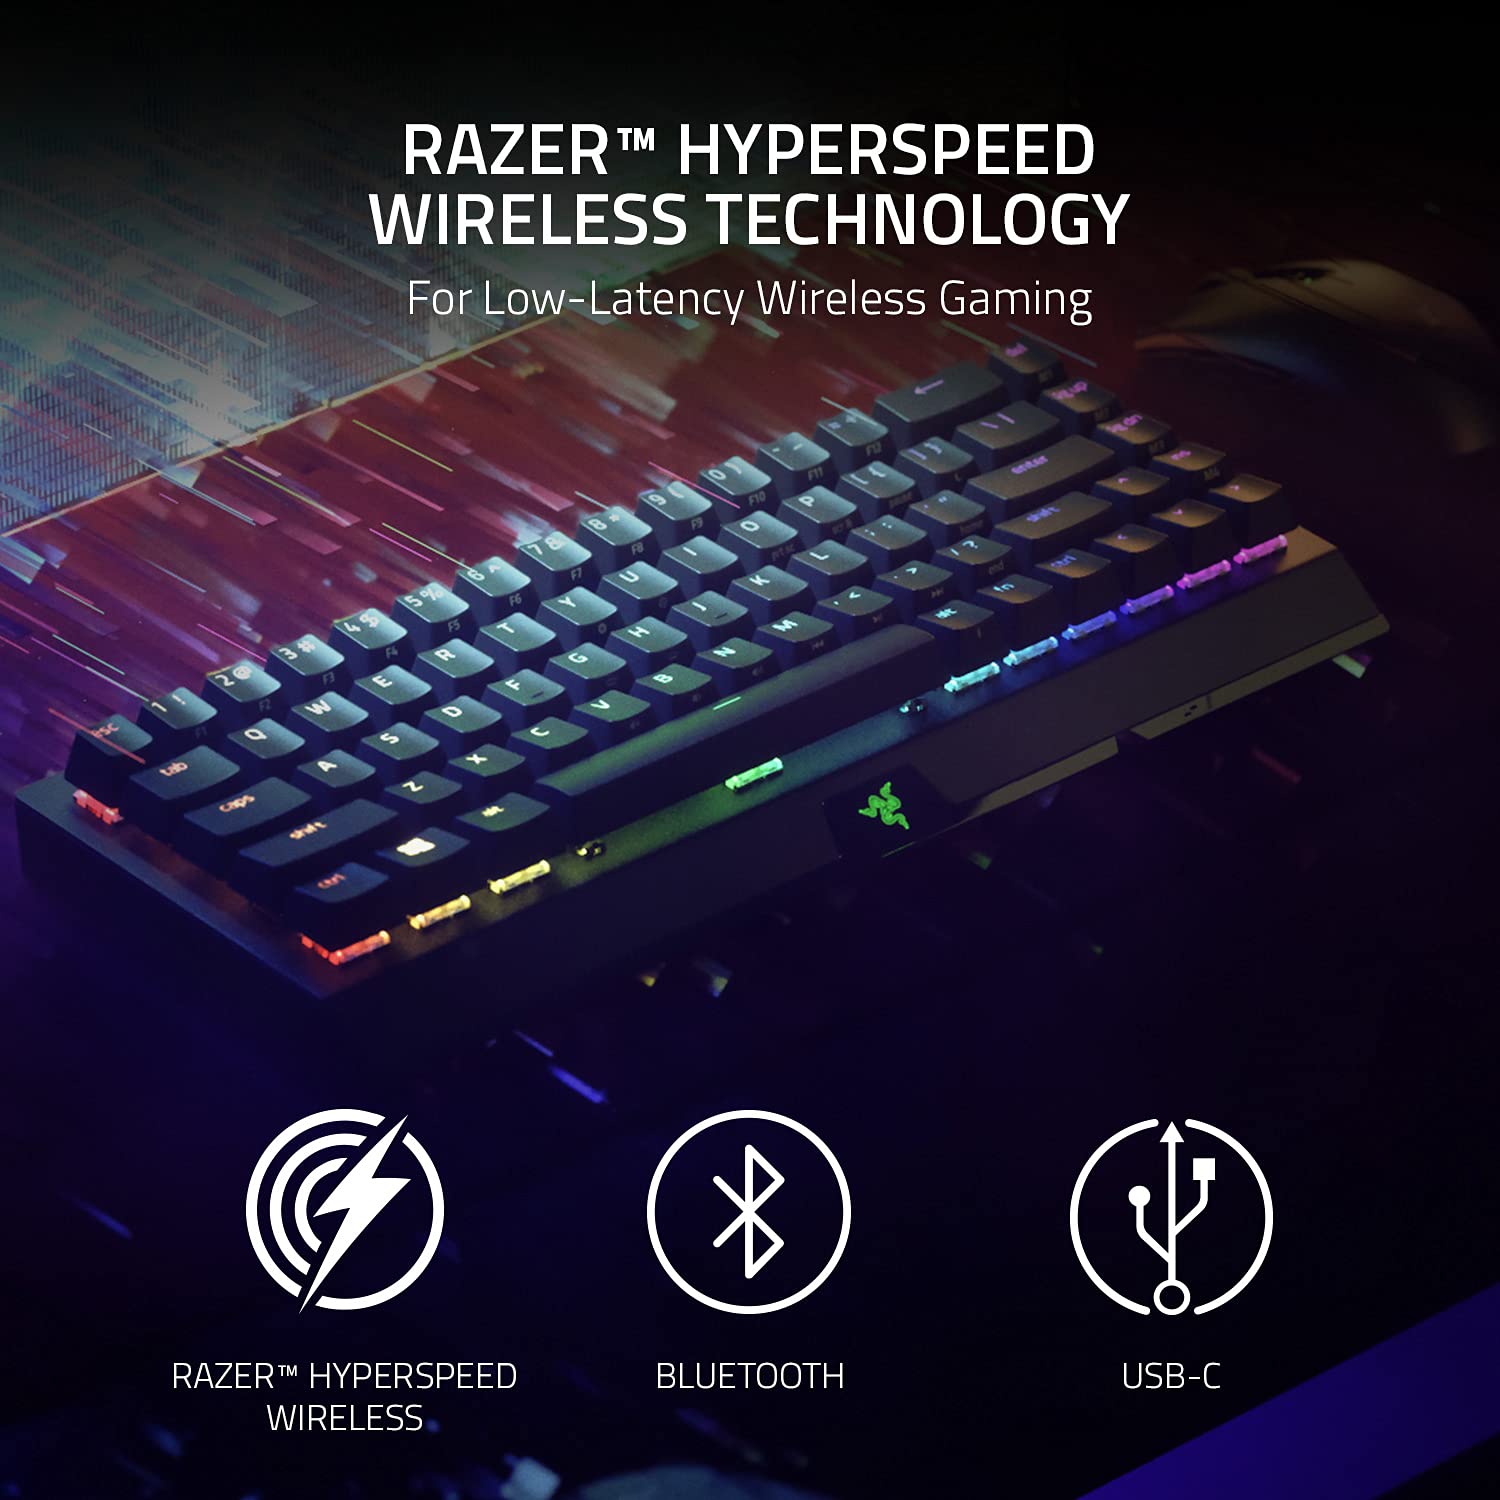 Razer BlackWidow V3 Mini HyperSpeed Wireless Gaming Keyboard,Tactile & Clicky, Green Mechanical Switches